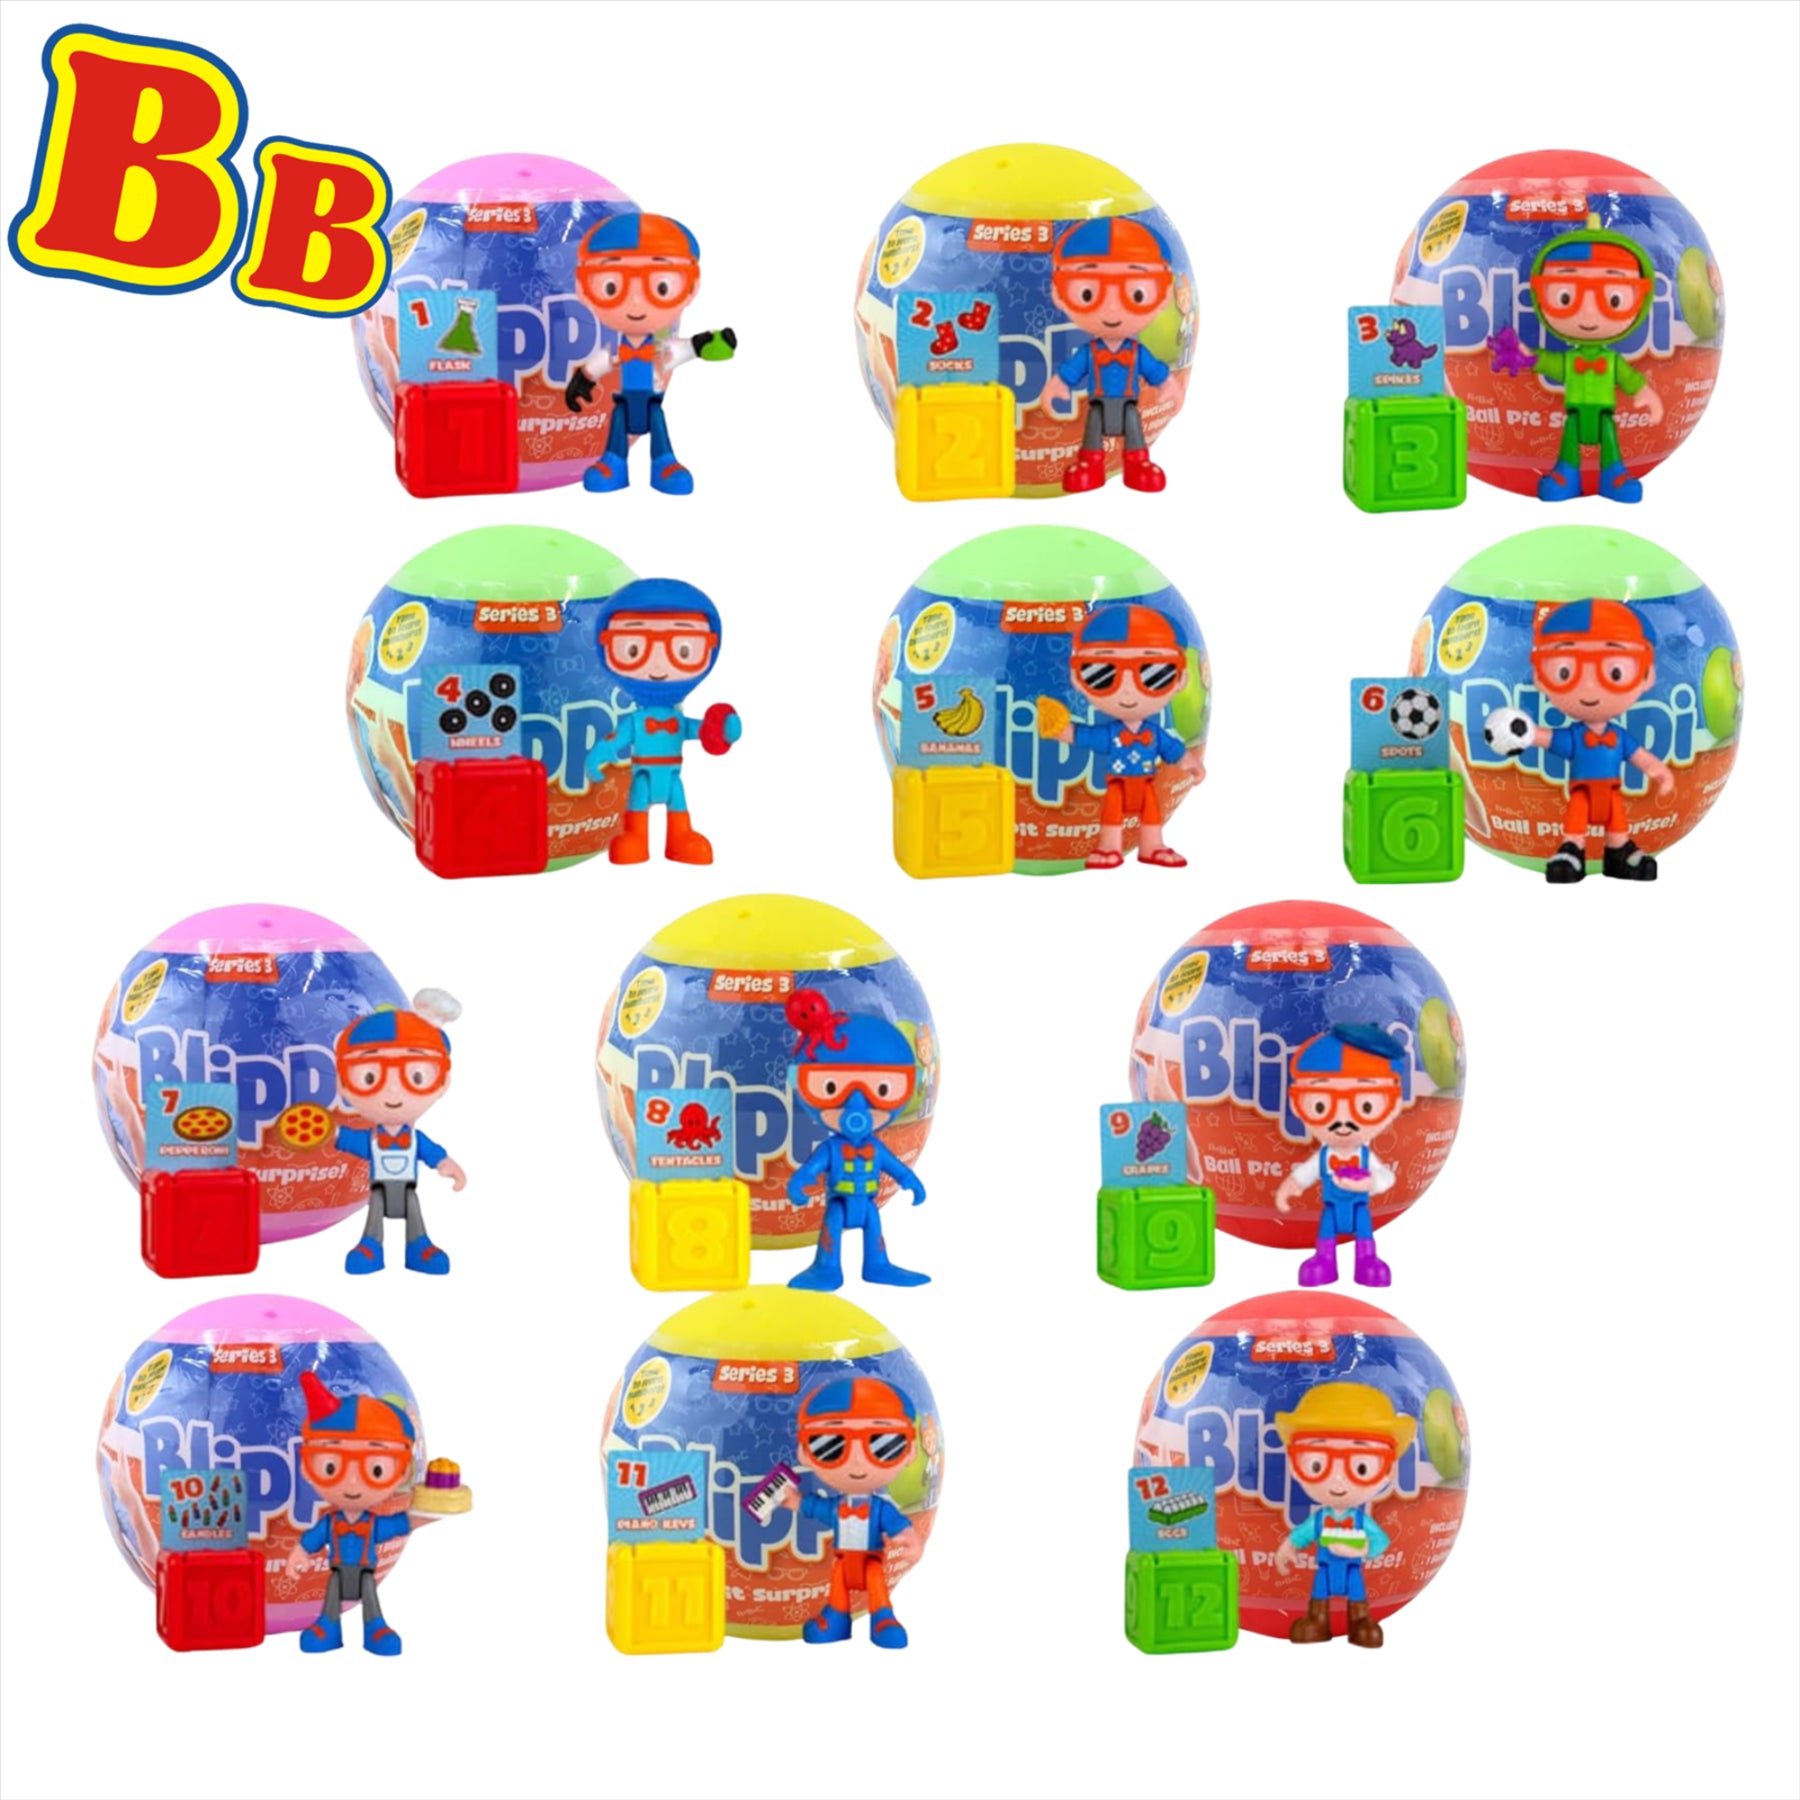 Blippi - 3" 8cm Fully Articulated Play Figure Identified Blind Capsules - Series 3 All 12 Characters - Toptoys2u